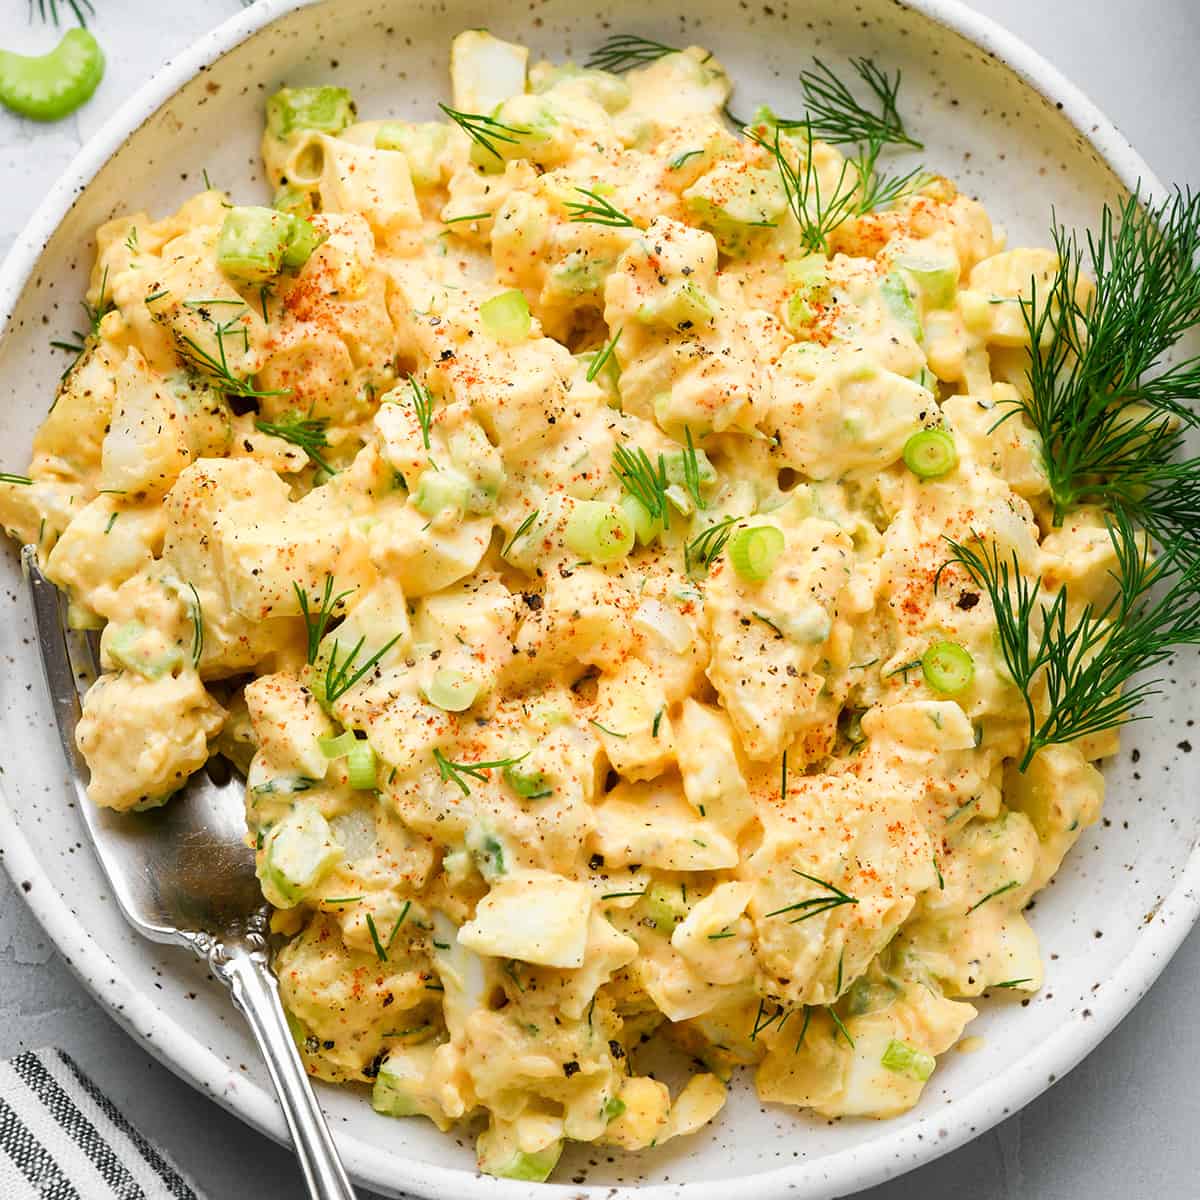 potato salad on a plate with a fork garnished with dill and green onions